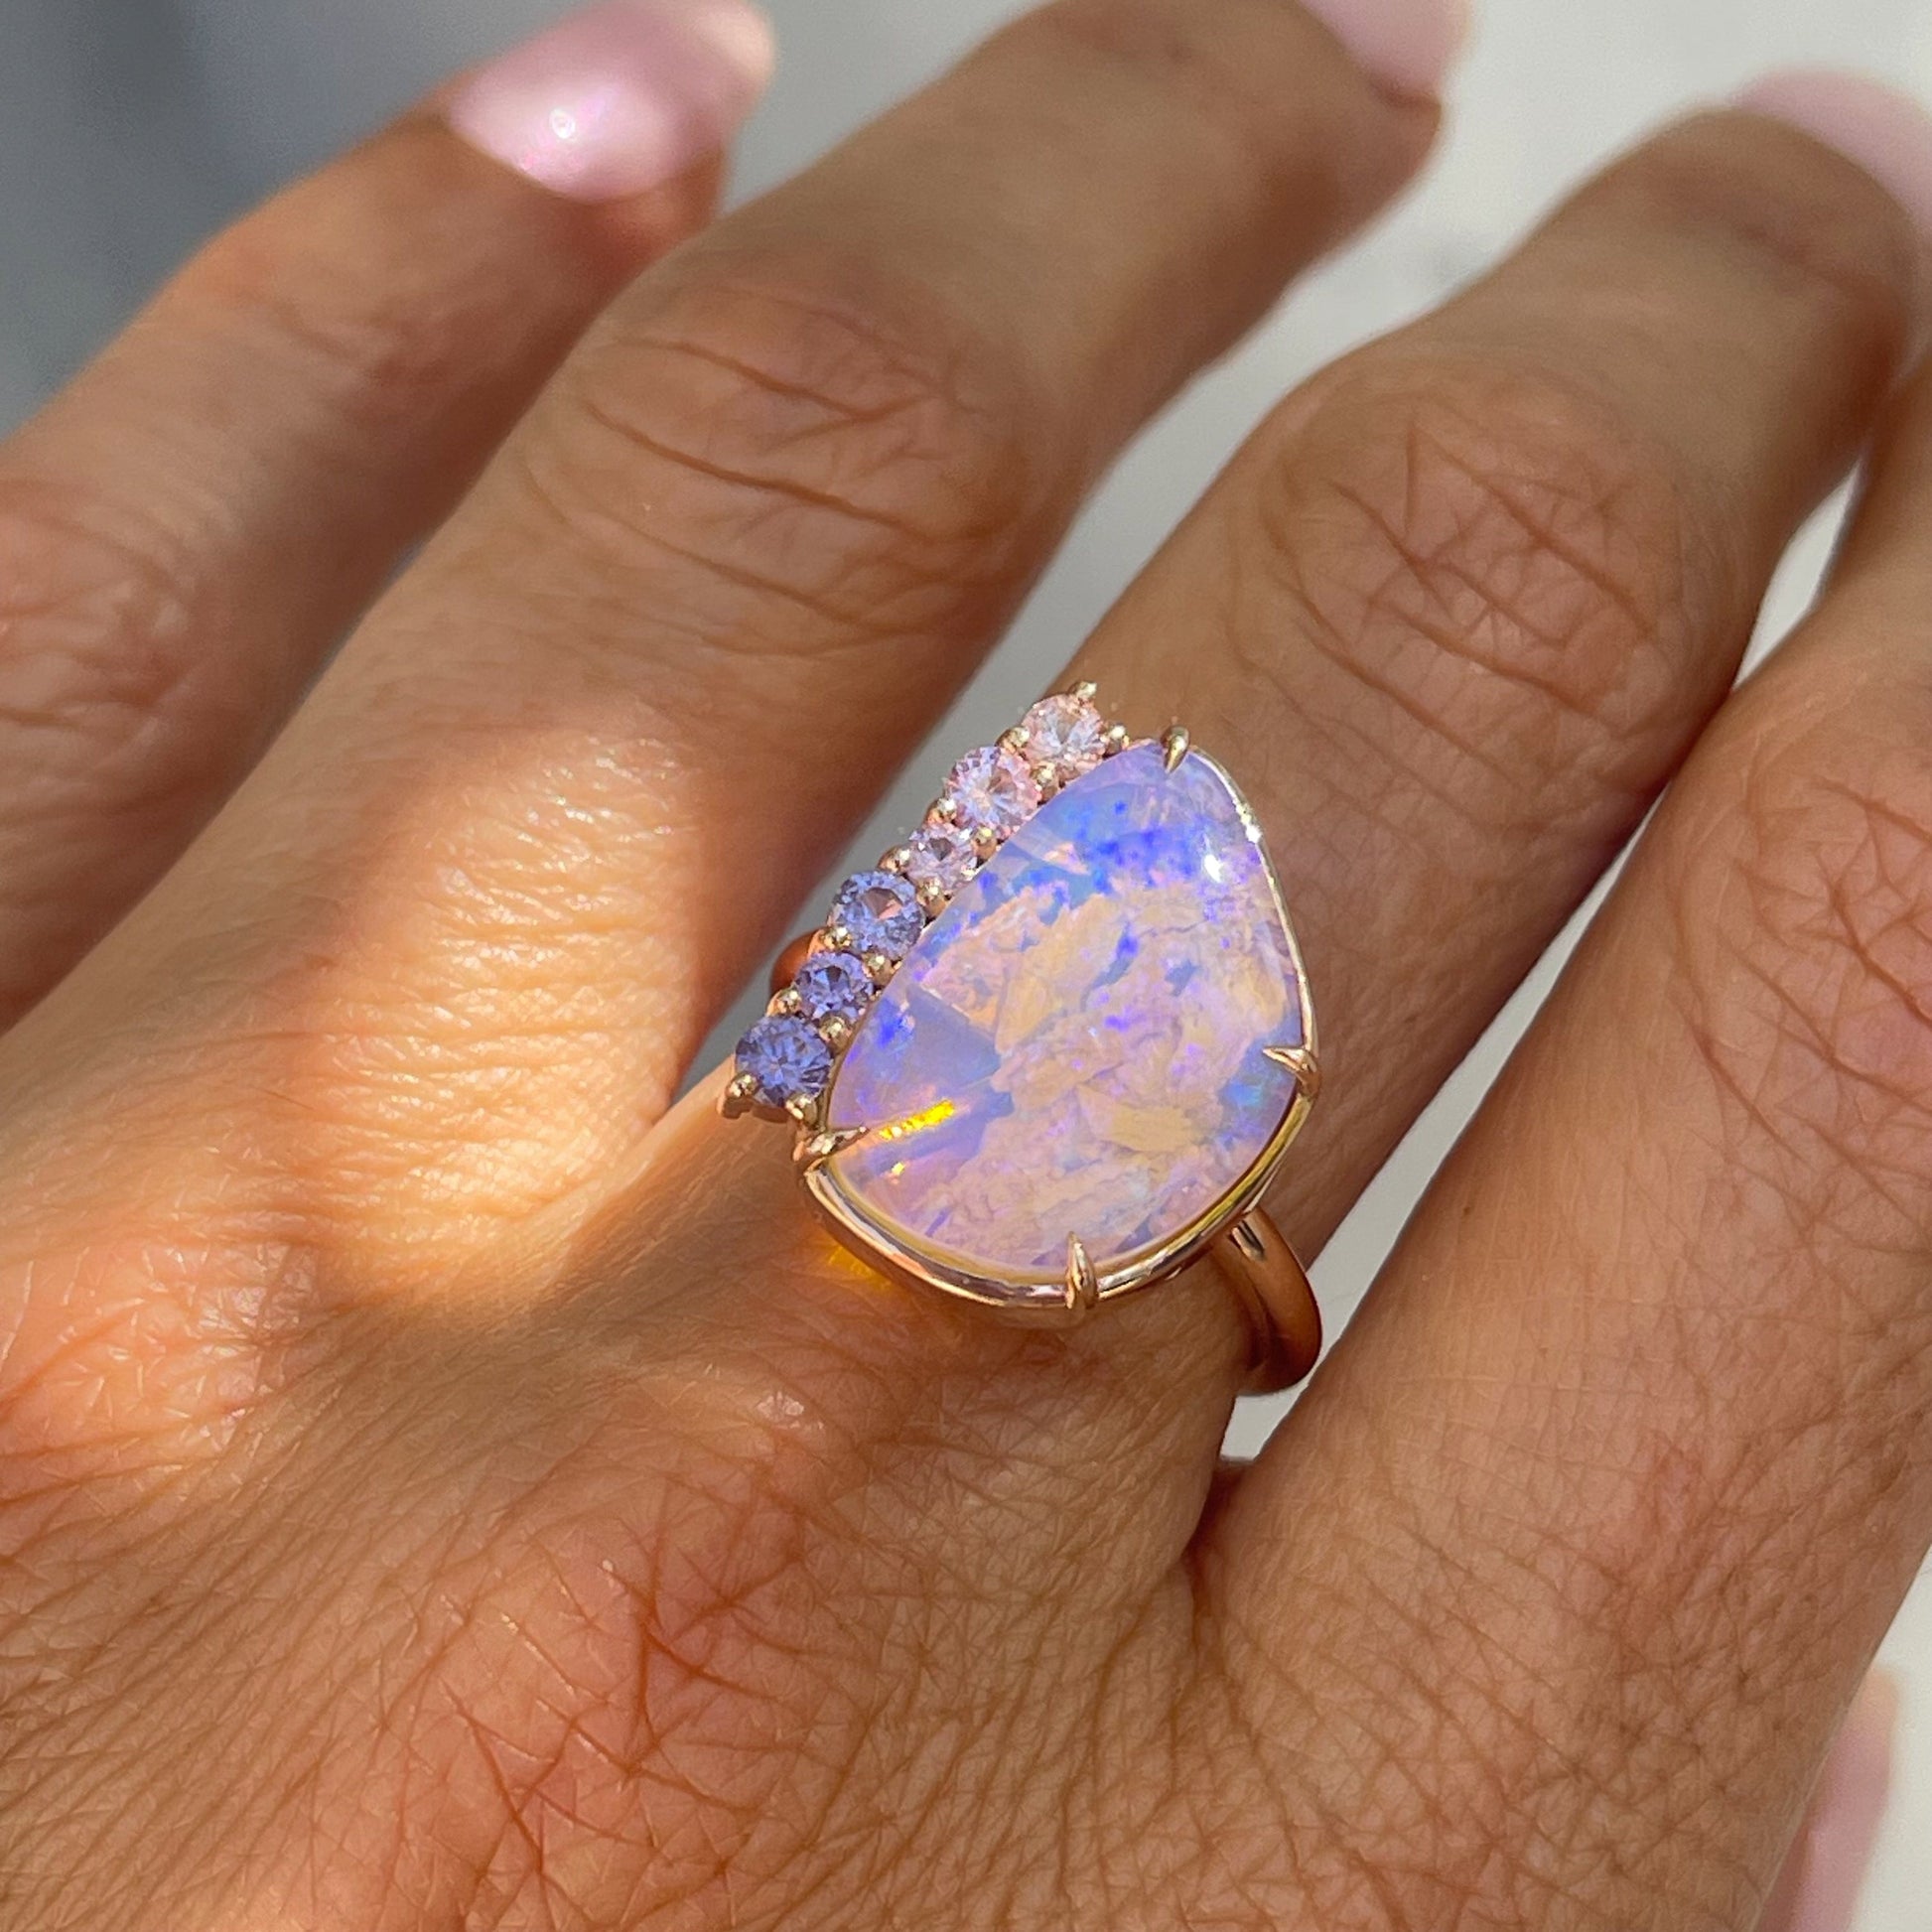 An Australian Opal Ring by NIXIN Jewelry modeled on a hand. The lavender opal ring is decorated with beautiful pink and purple sapphires.